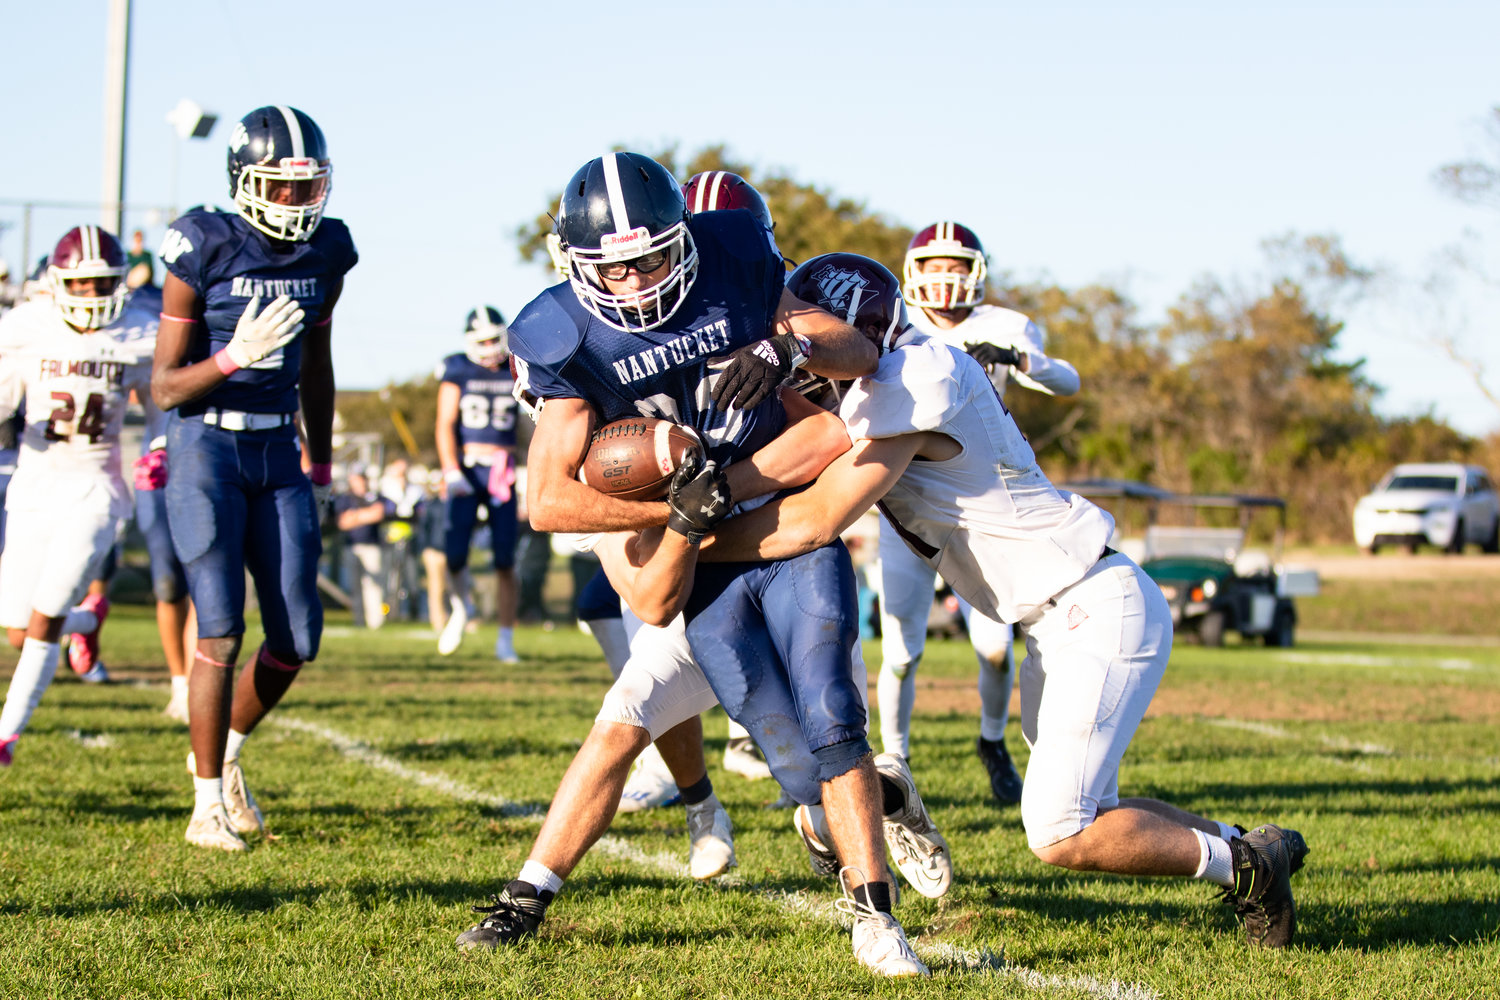 Griffin Fox carries the ball against Falmouth.